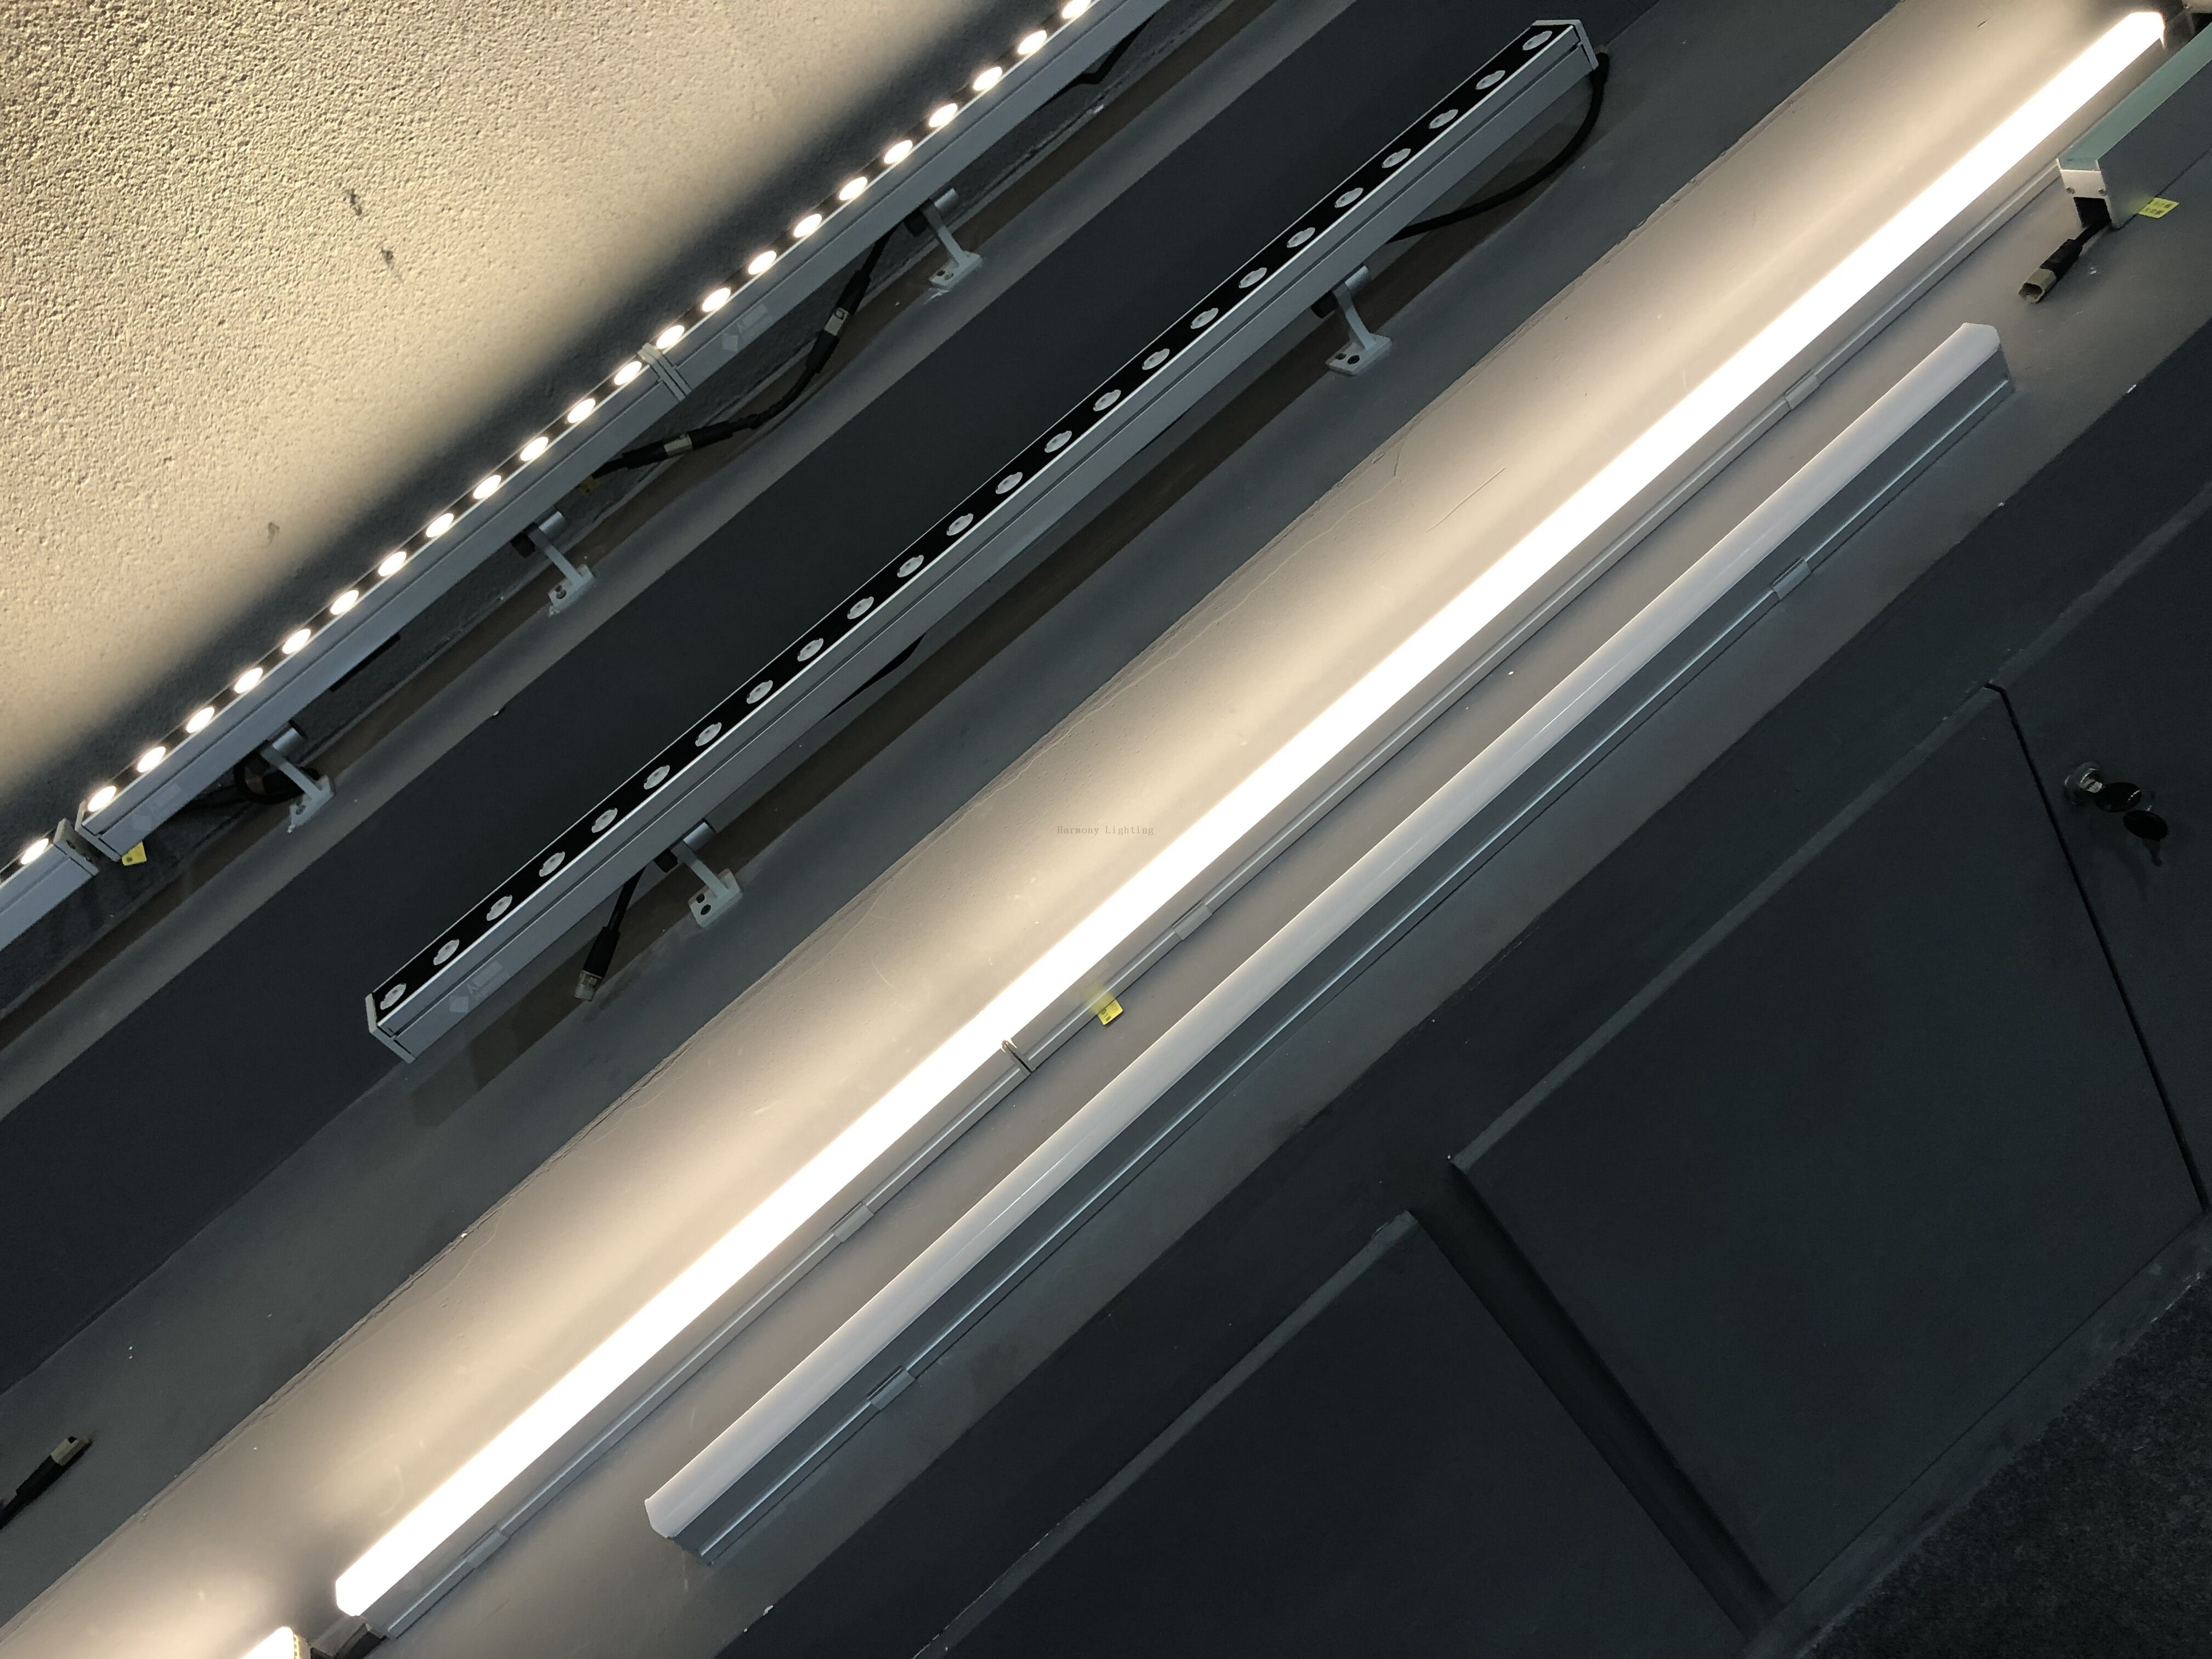 RH-C25 12W IP67 Aluminum China Factory Aluminium Profile For The Construction Outdoor wall mounted Led Linear light